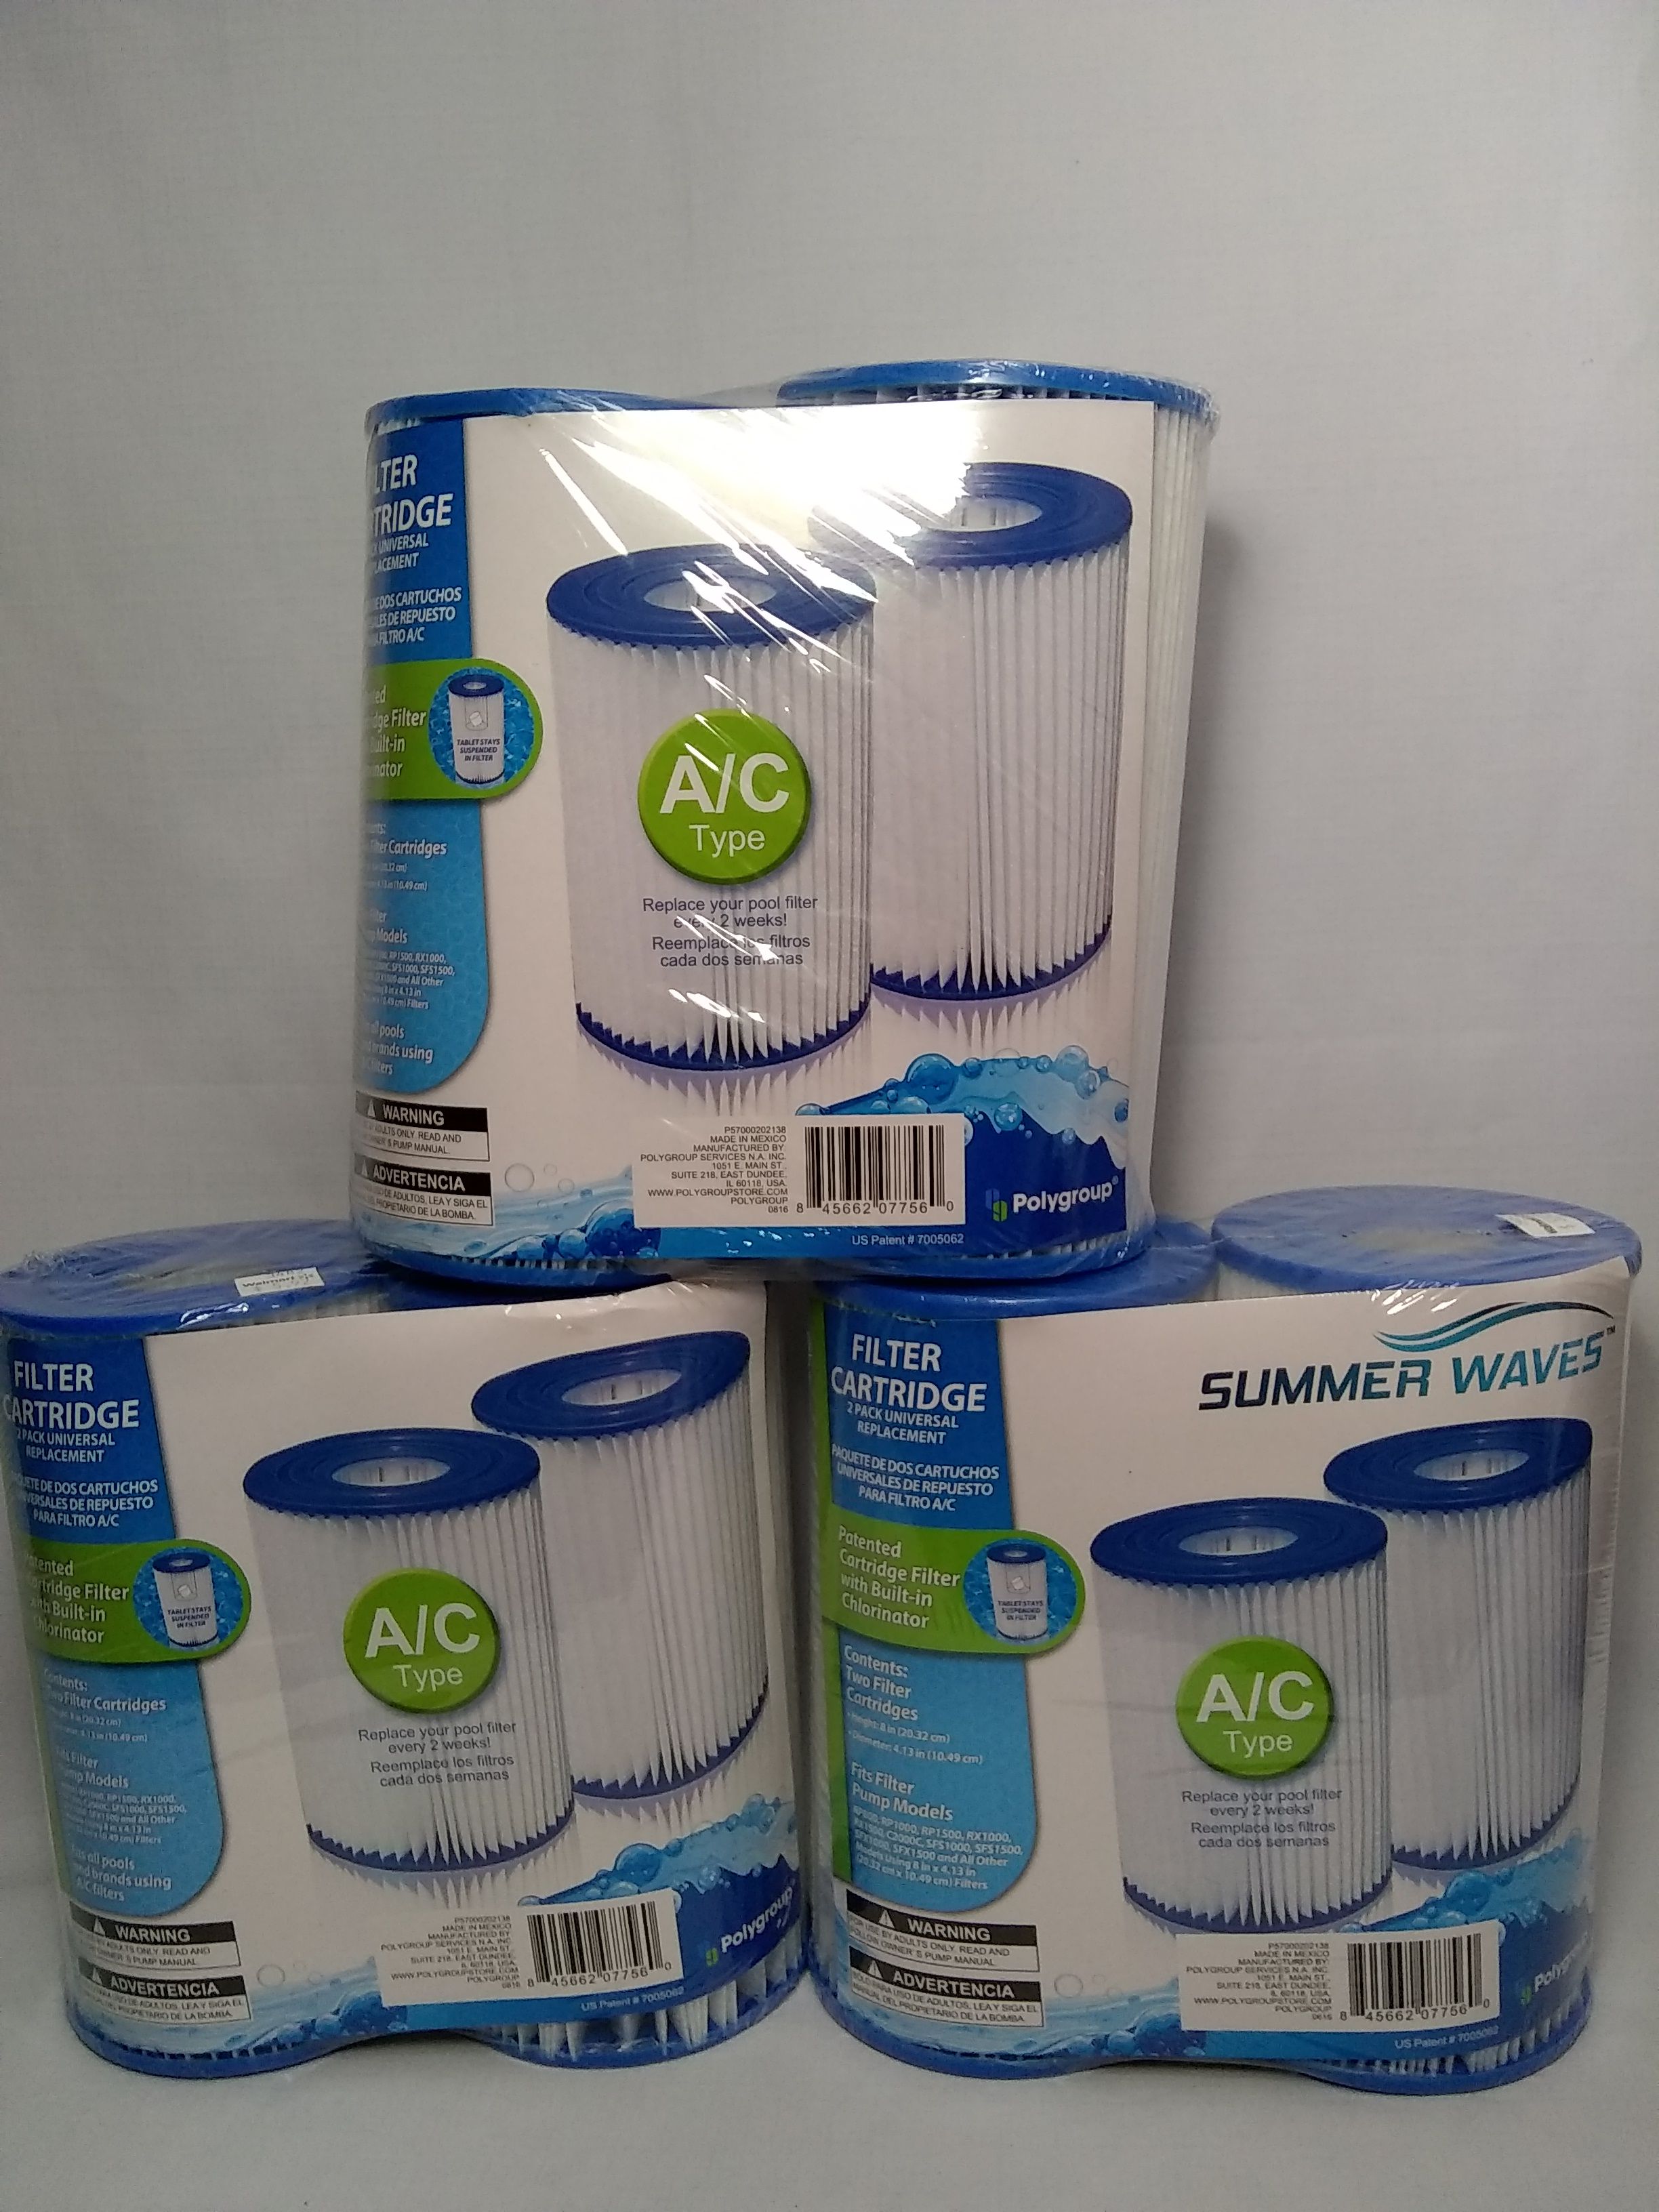 (3) Pack of 6 New - Type A or C (A/C) Pool Filter Cartridge Universal Replacement - Summer Wave/Polygroup . Condition is New.